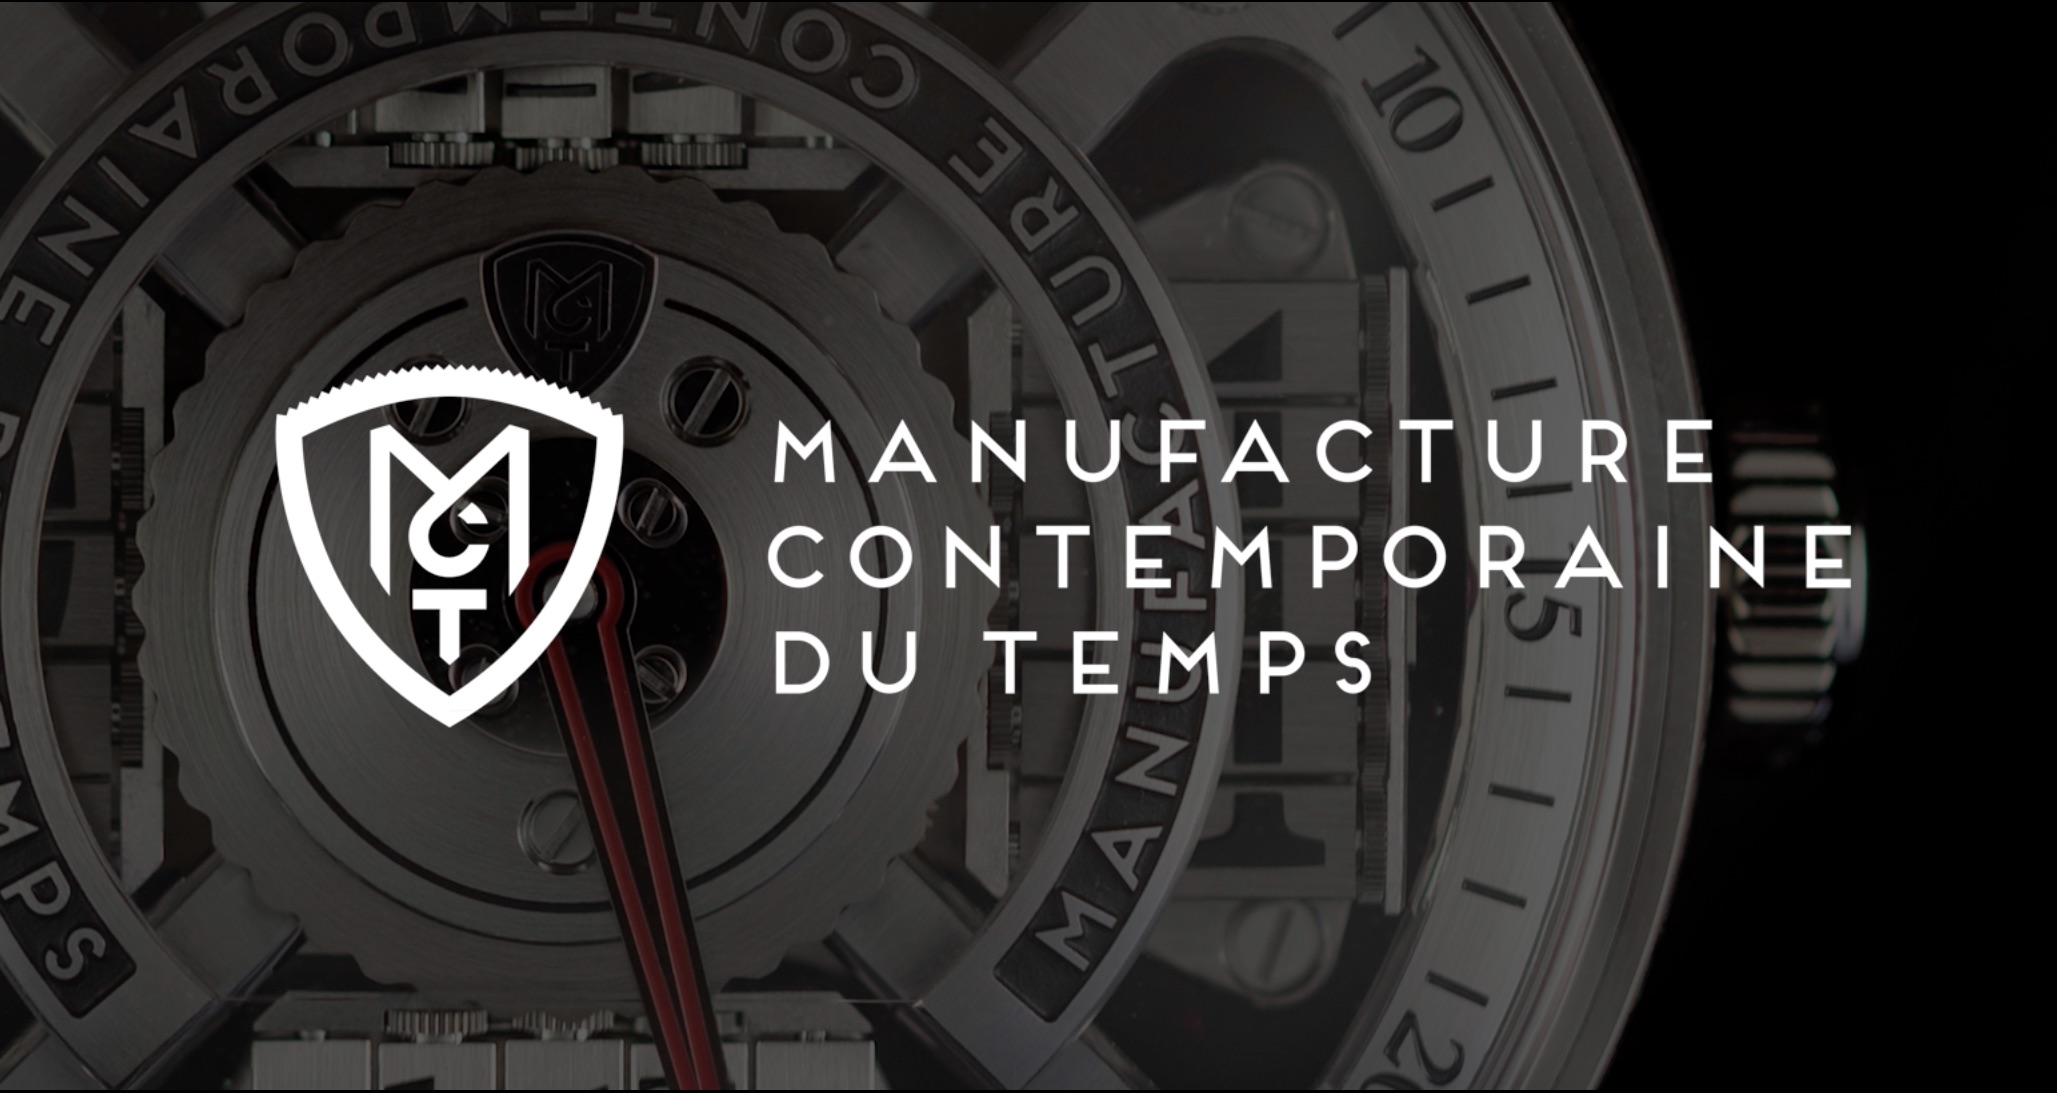 The Monochrome Video Week - MCT Watches - The Present and Future of an Independent Brand